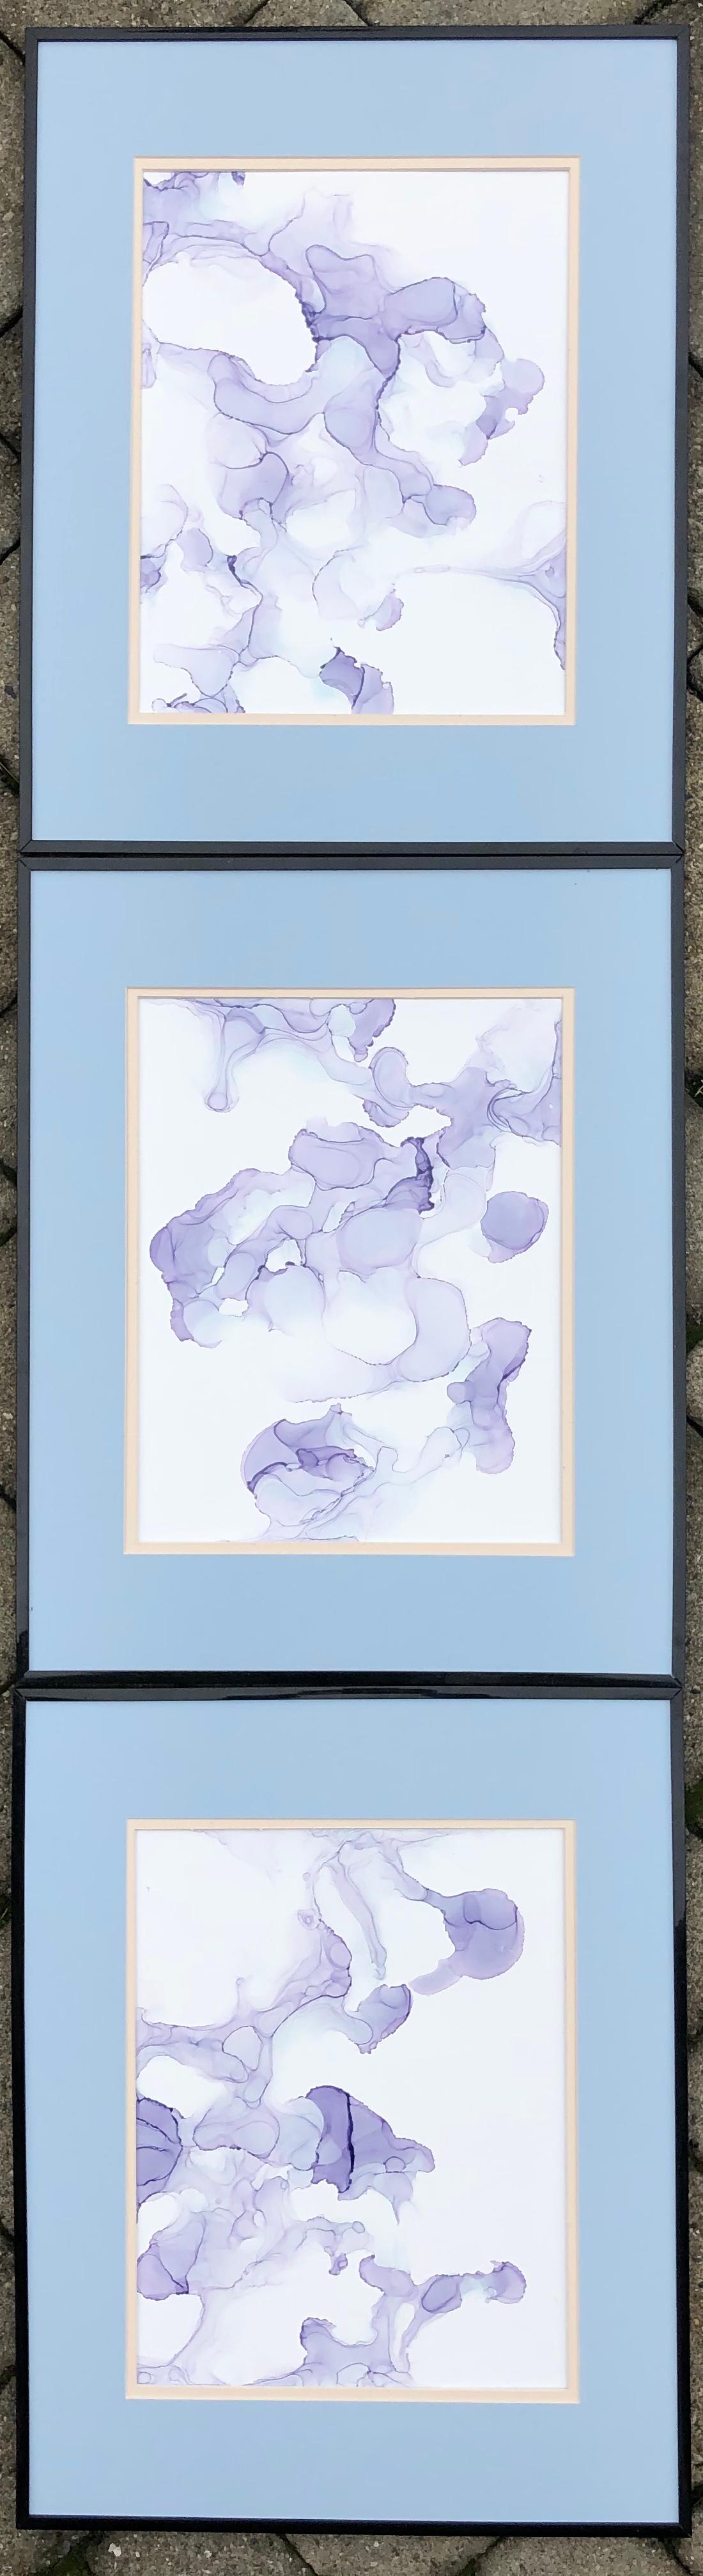 Mila Akopova Abstract Painting - Line of Fate II-abstraction art, made in pale violet, blue, lavender color